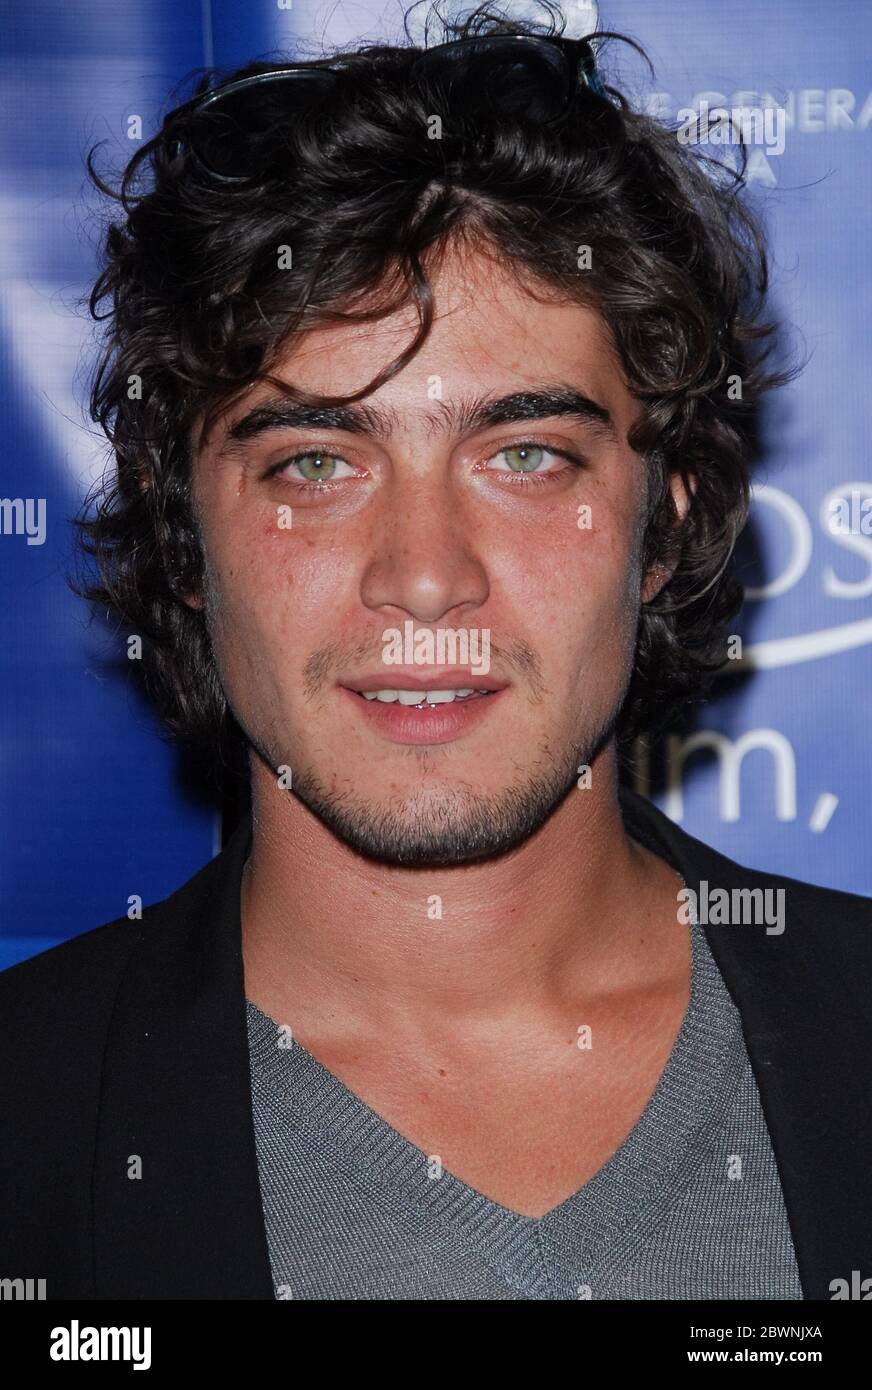 Riccardo Scamarcio at the "Los Angeles, Italia" FIlm Festival Presents the Los Angeles Premiere of "All The Invisible Children held at the Mann Chinese 6 Theatres in Hollywood, CA. The event took place on Monday, February 19, 2007. Photo by: SBM / PictureLux- File Reference # 34006-3198SBMPLX Stock Photo